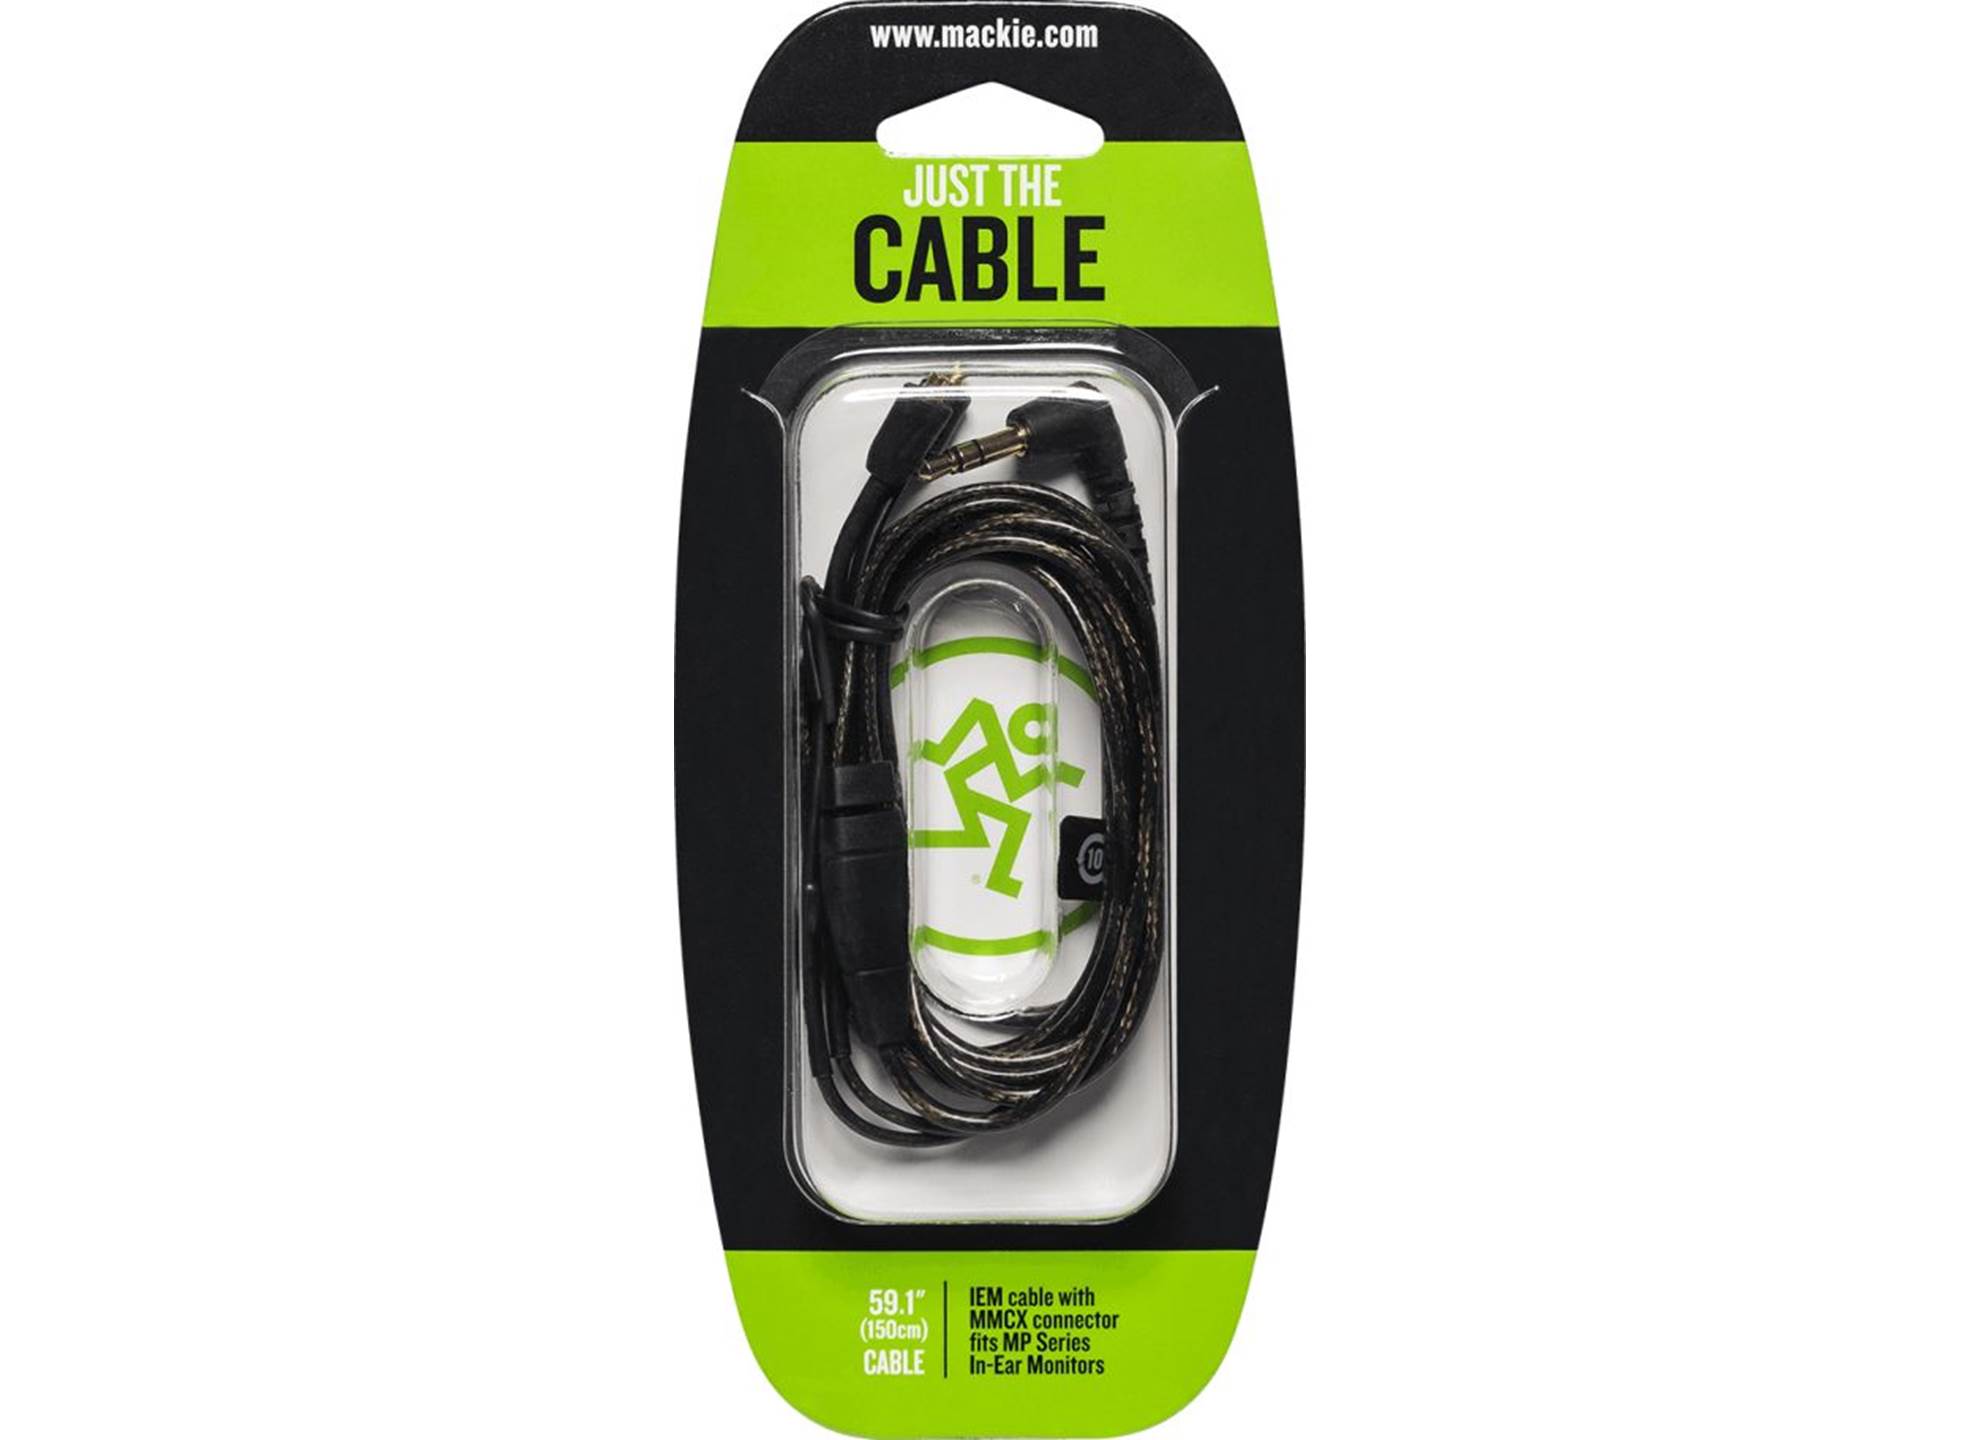 Cable kit